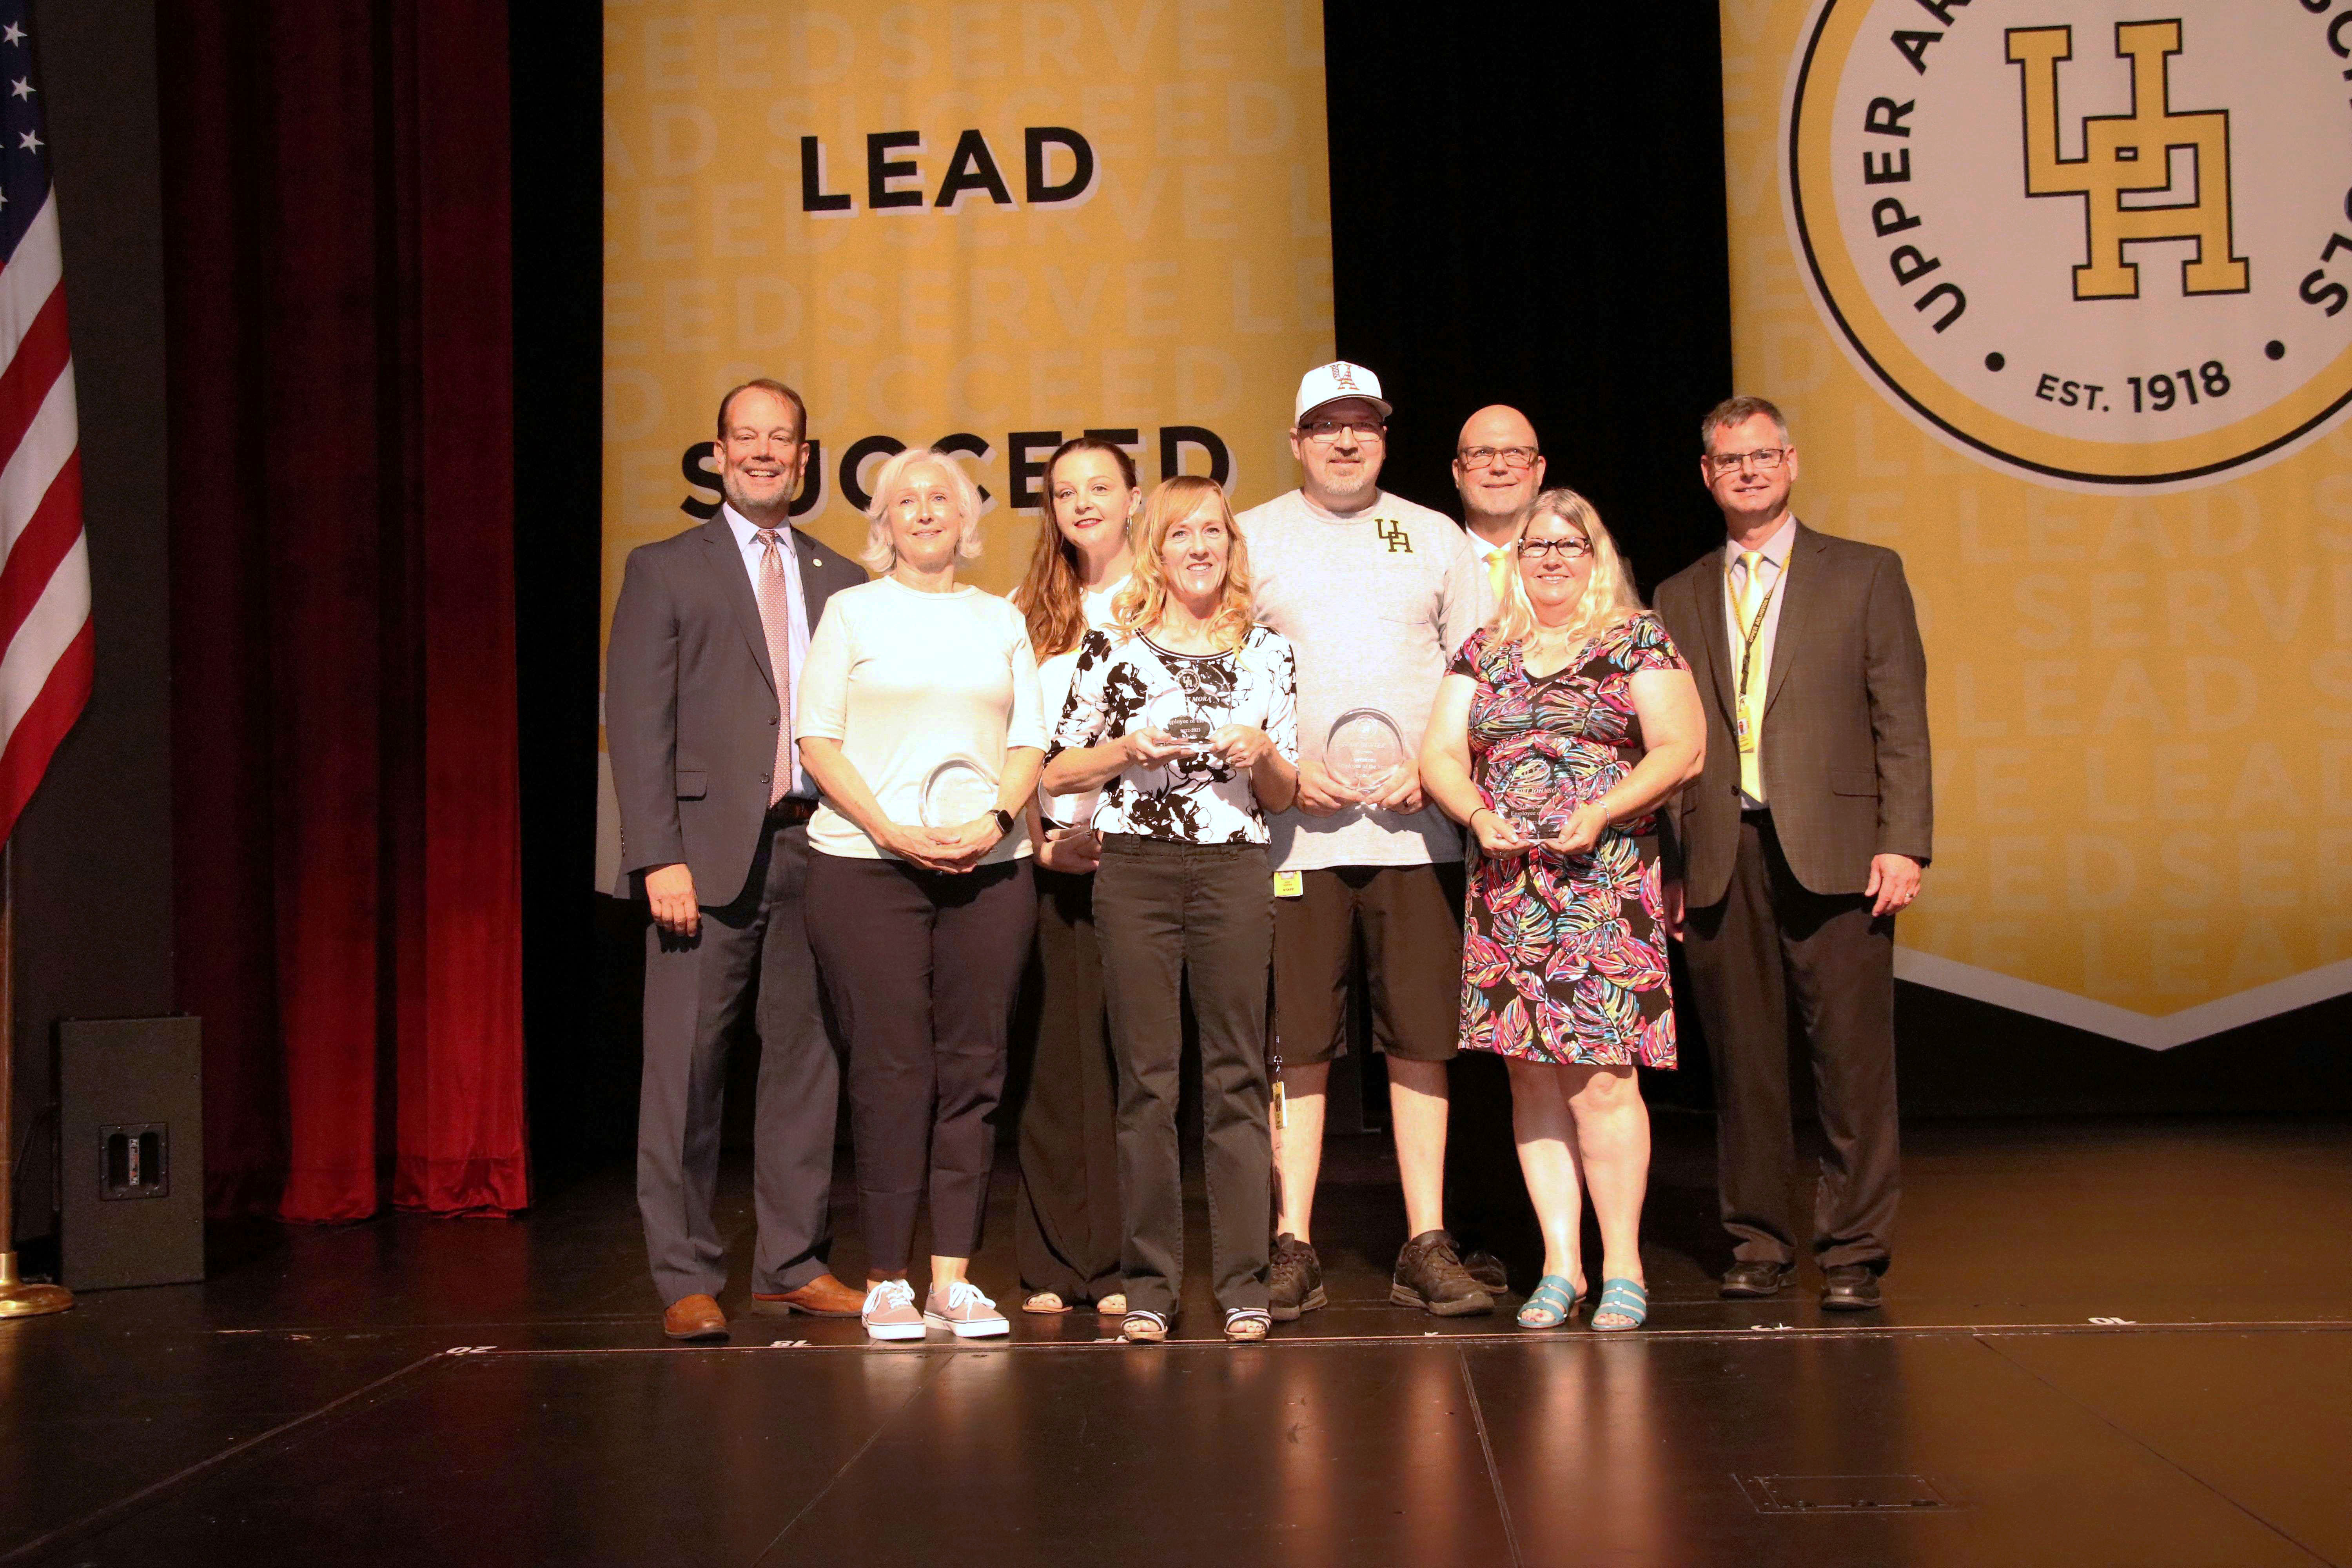 The five recipients of classified and support staff awards posing for a photo on stage with three administrators and gold banners in the background